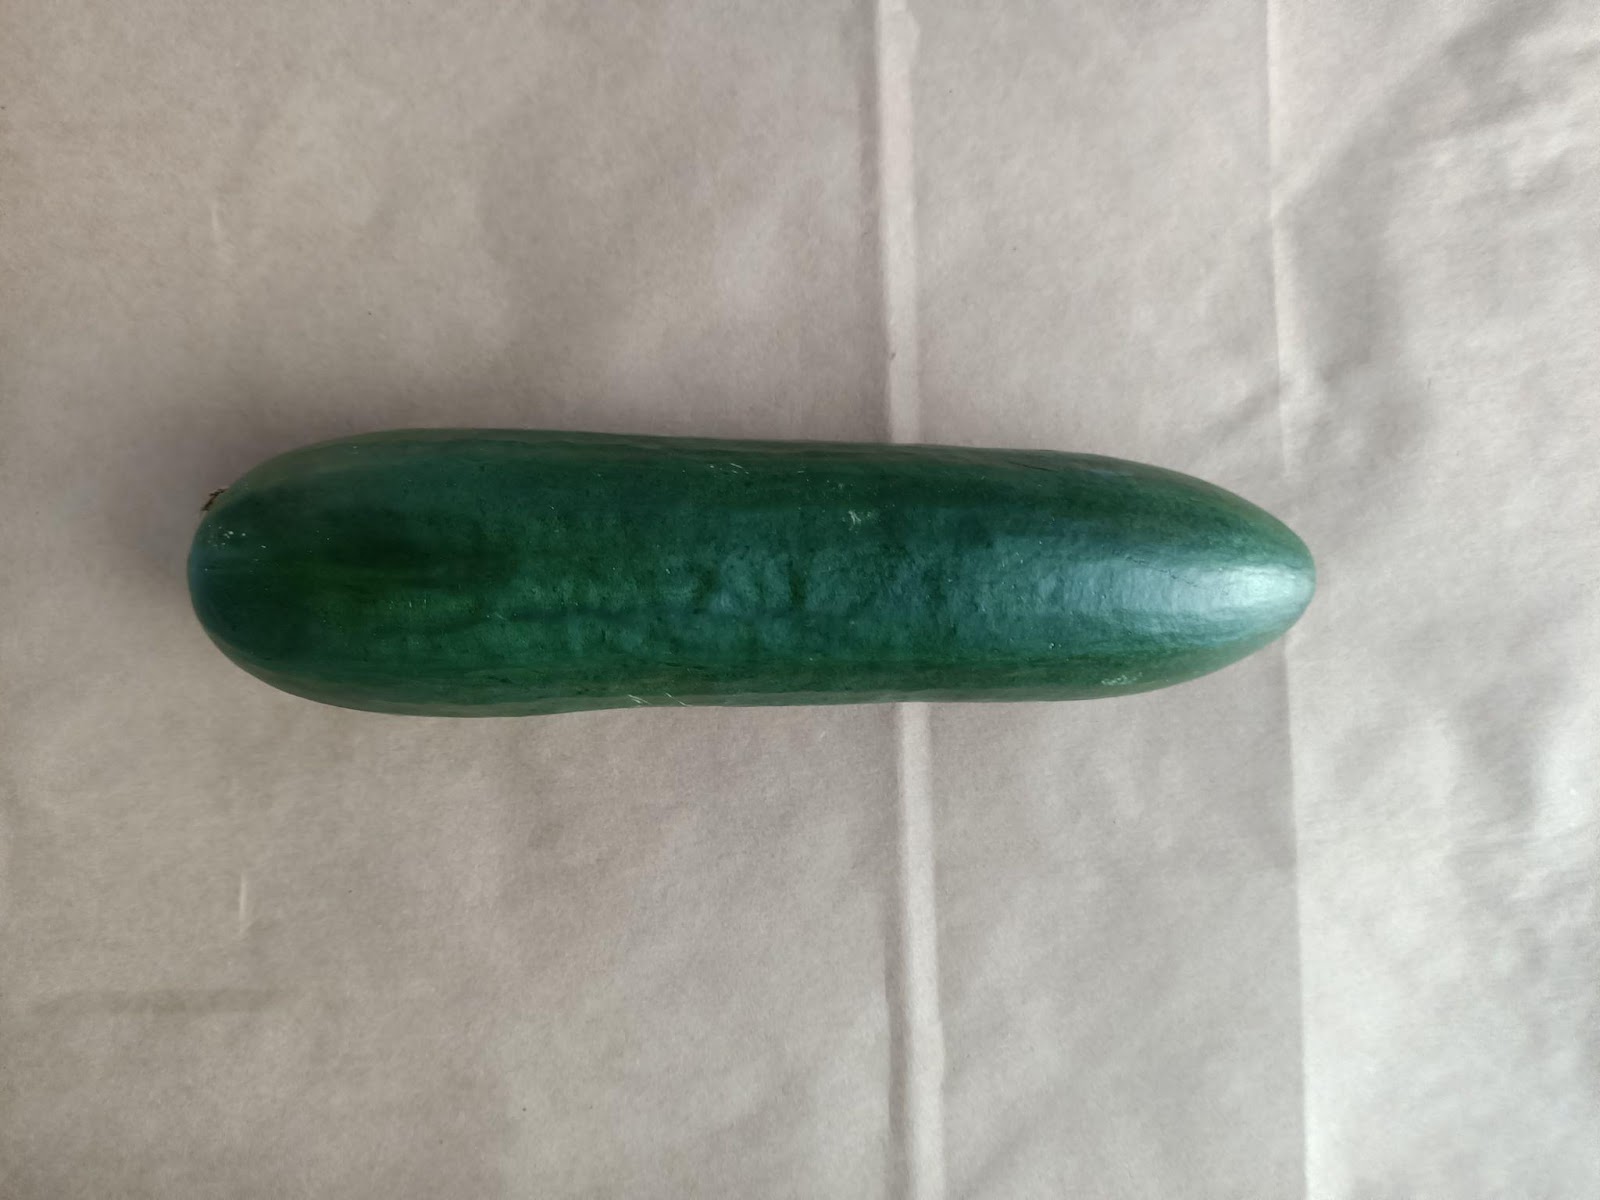 A green vegetable on a white surface

Description automatically generated